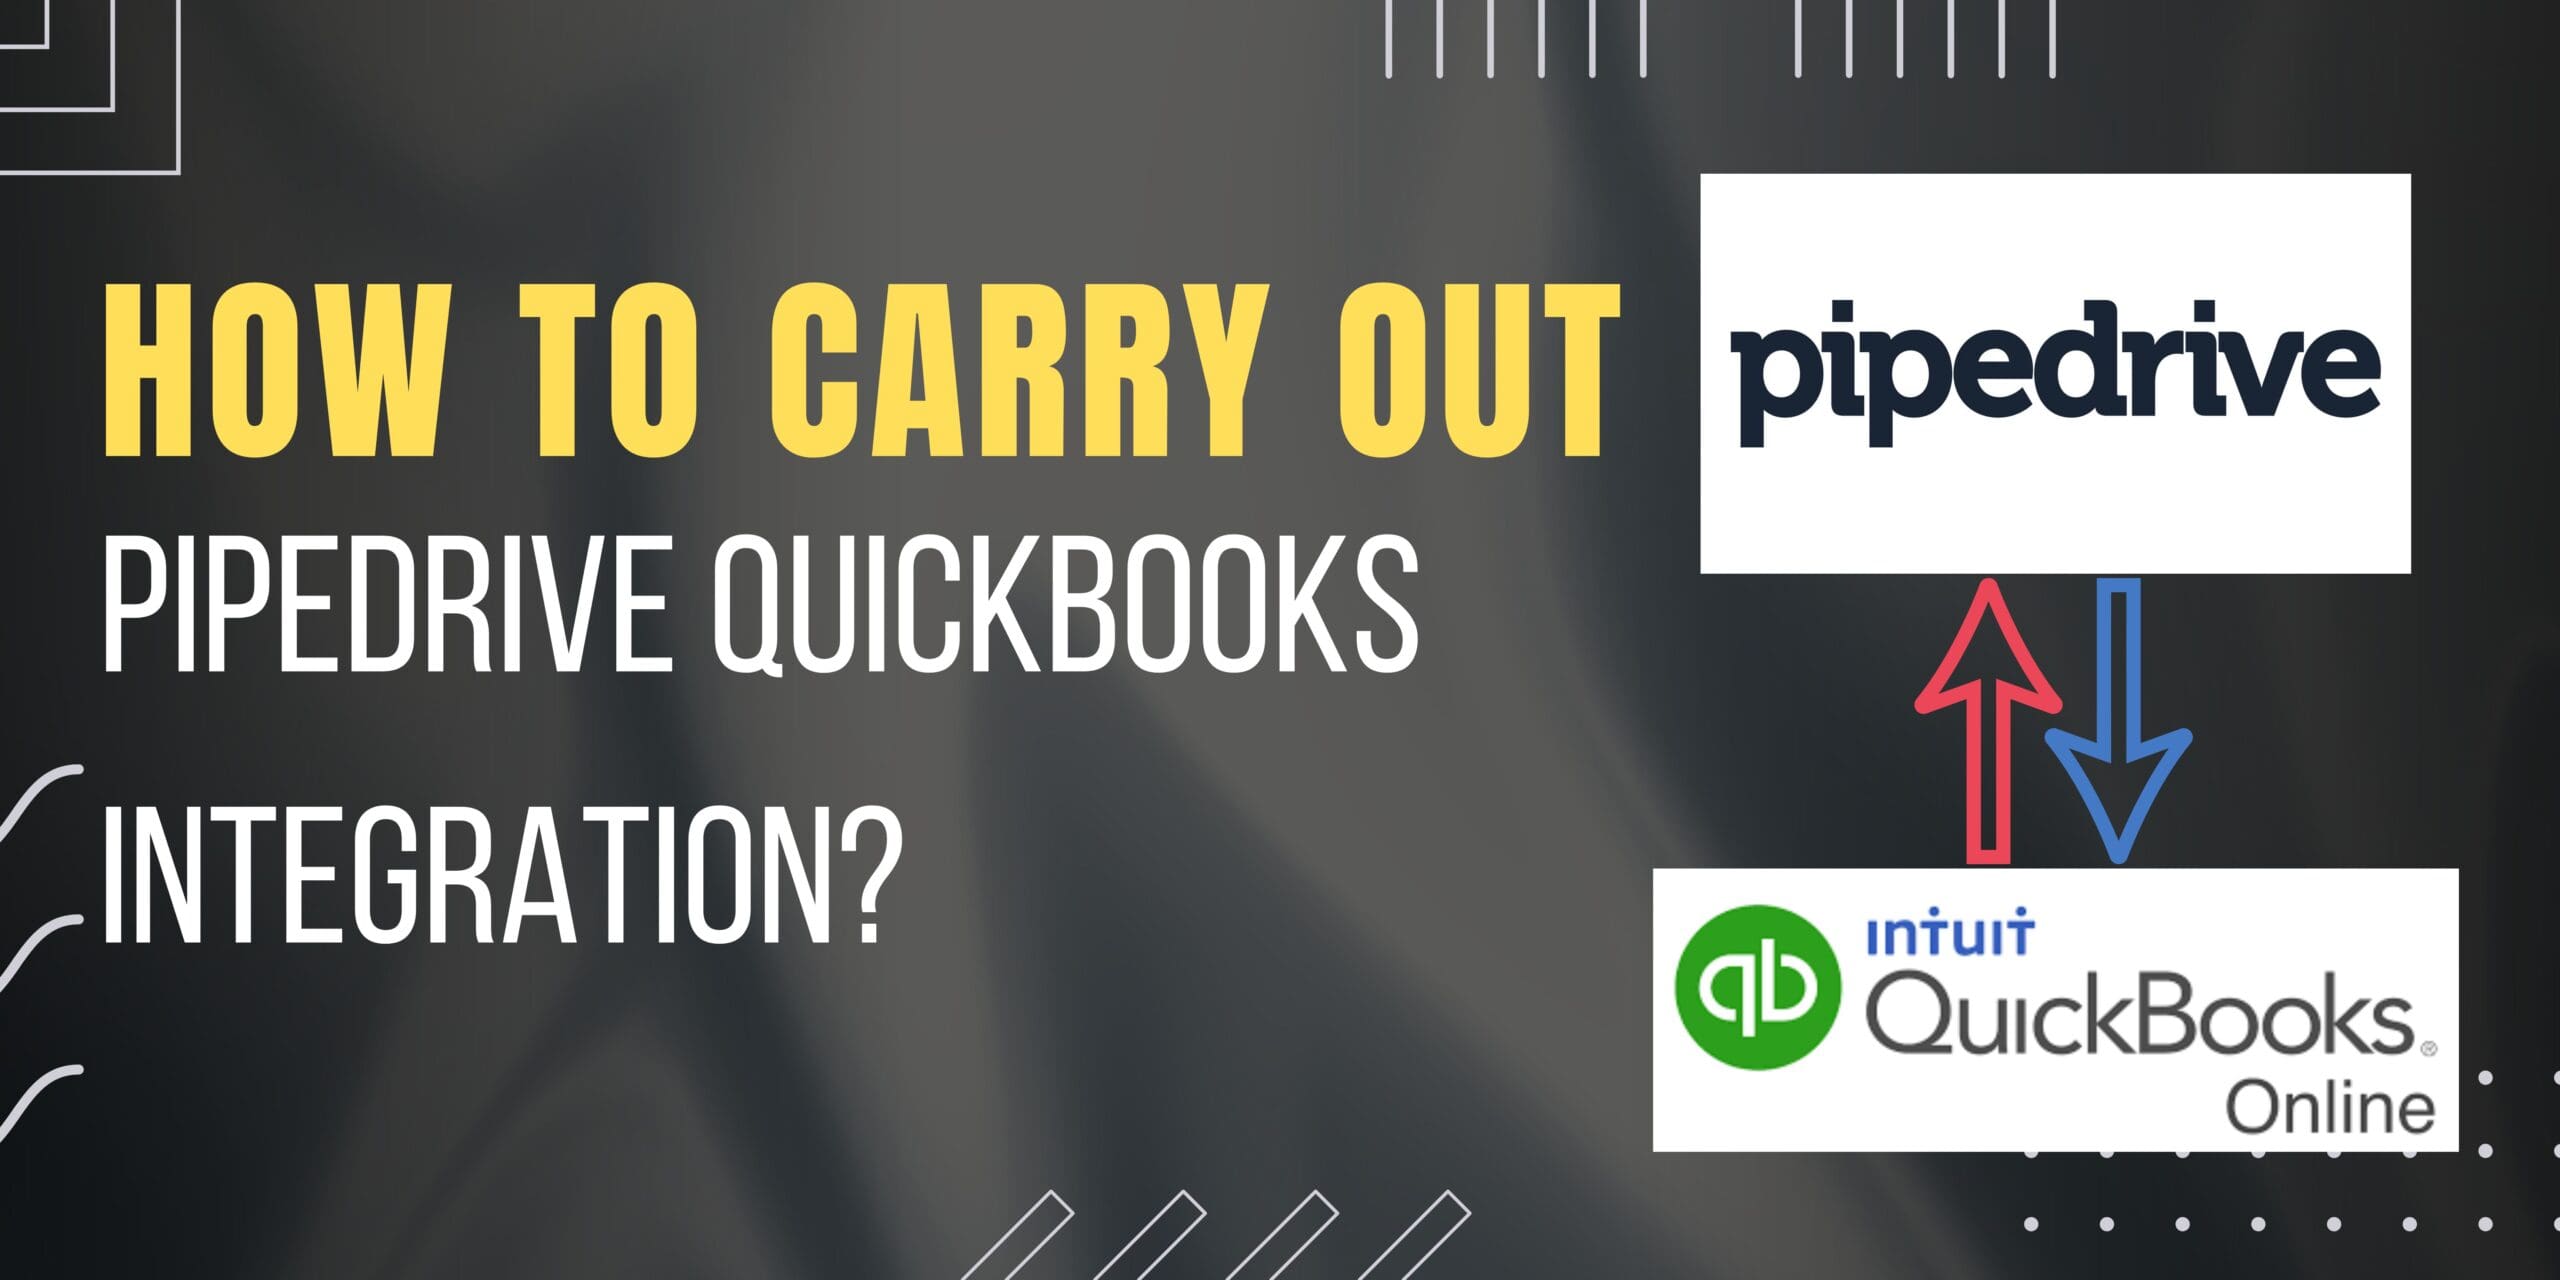 How to Carry Out Pipedrive QuickBooks Integration?